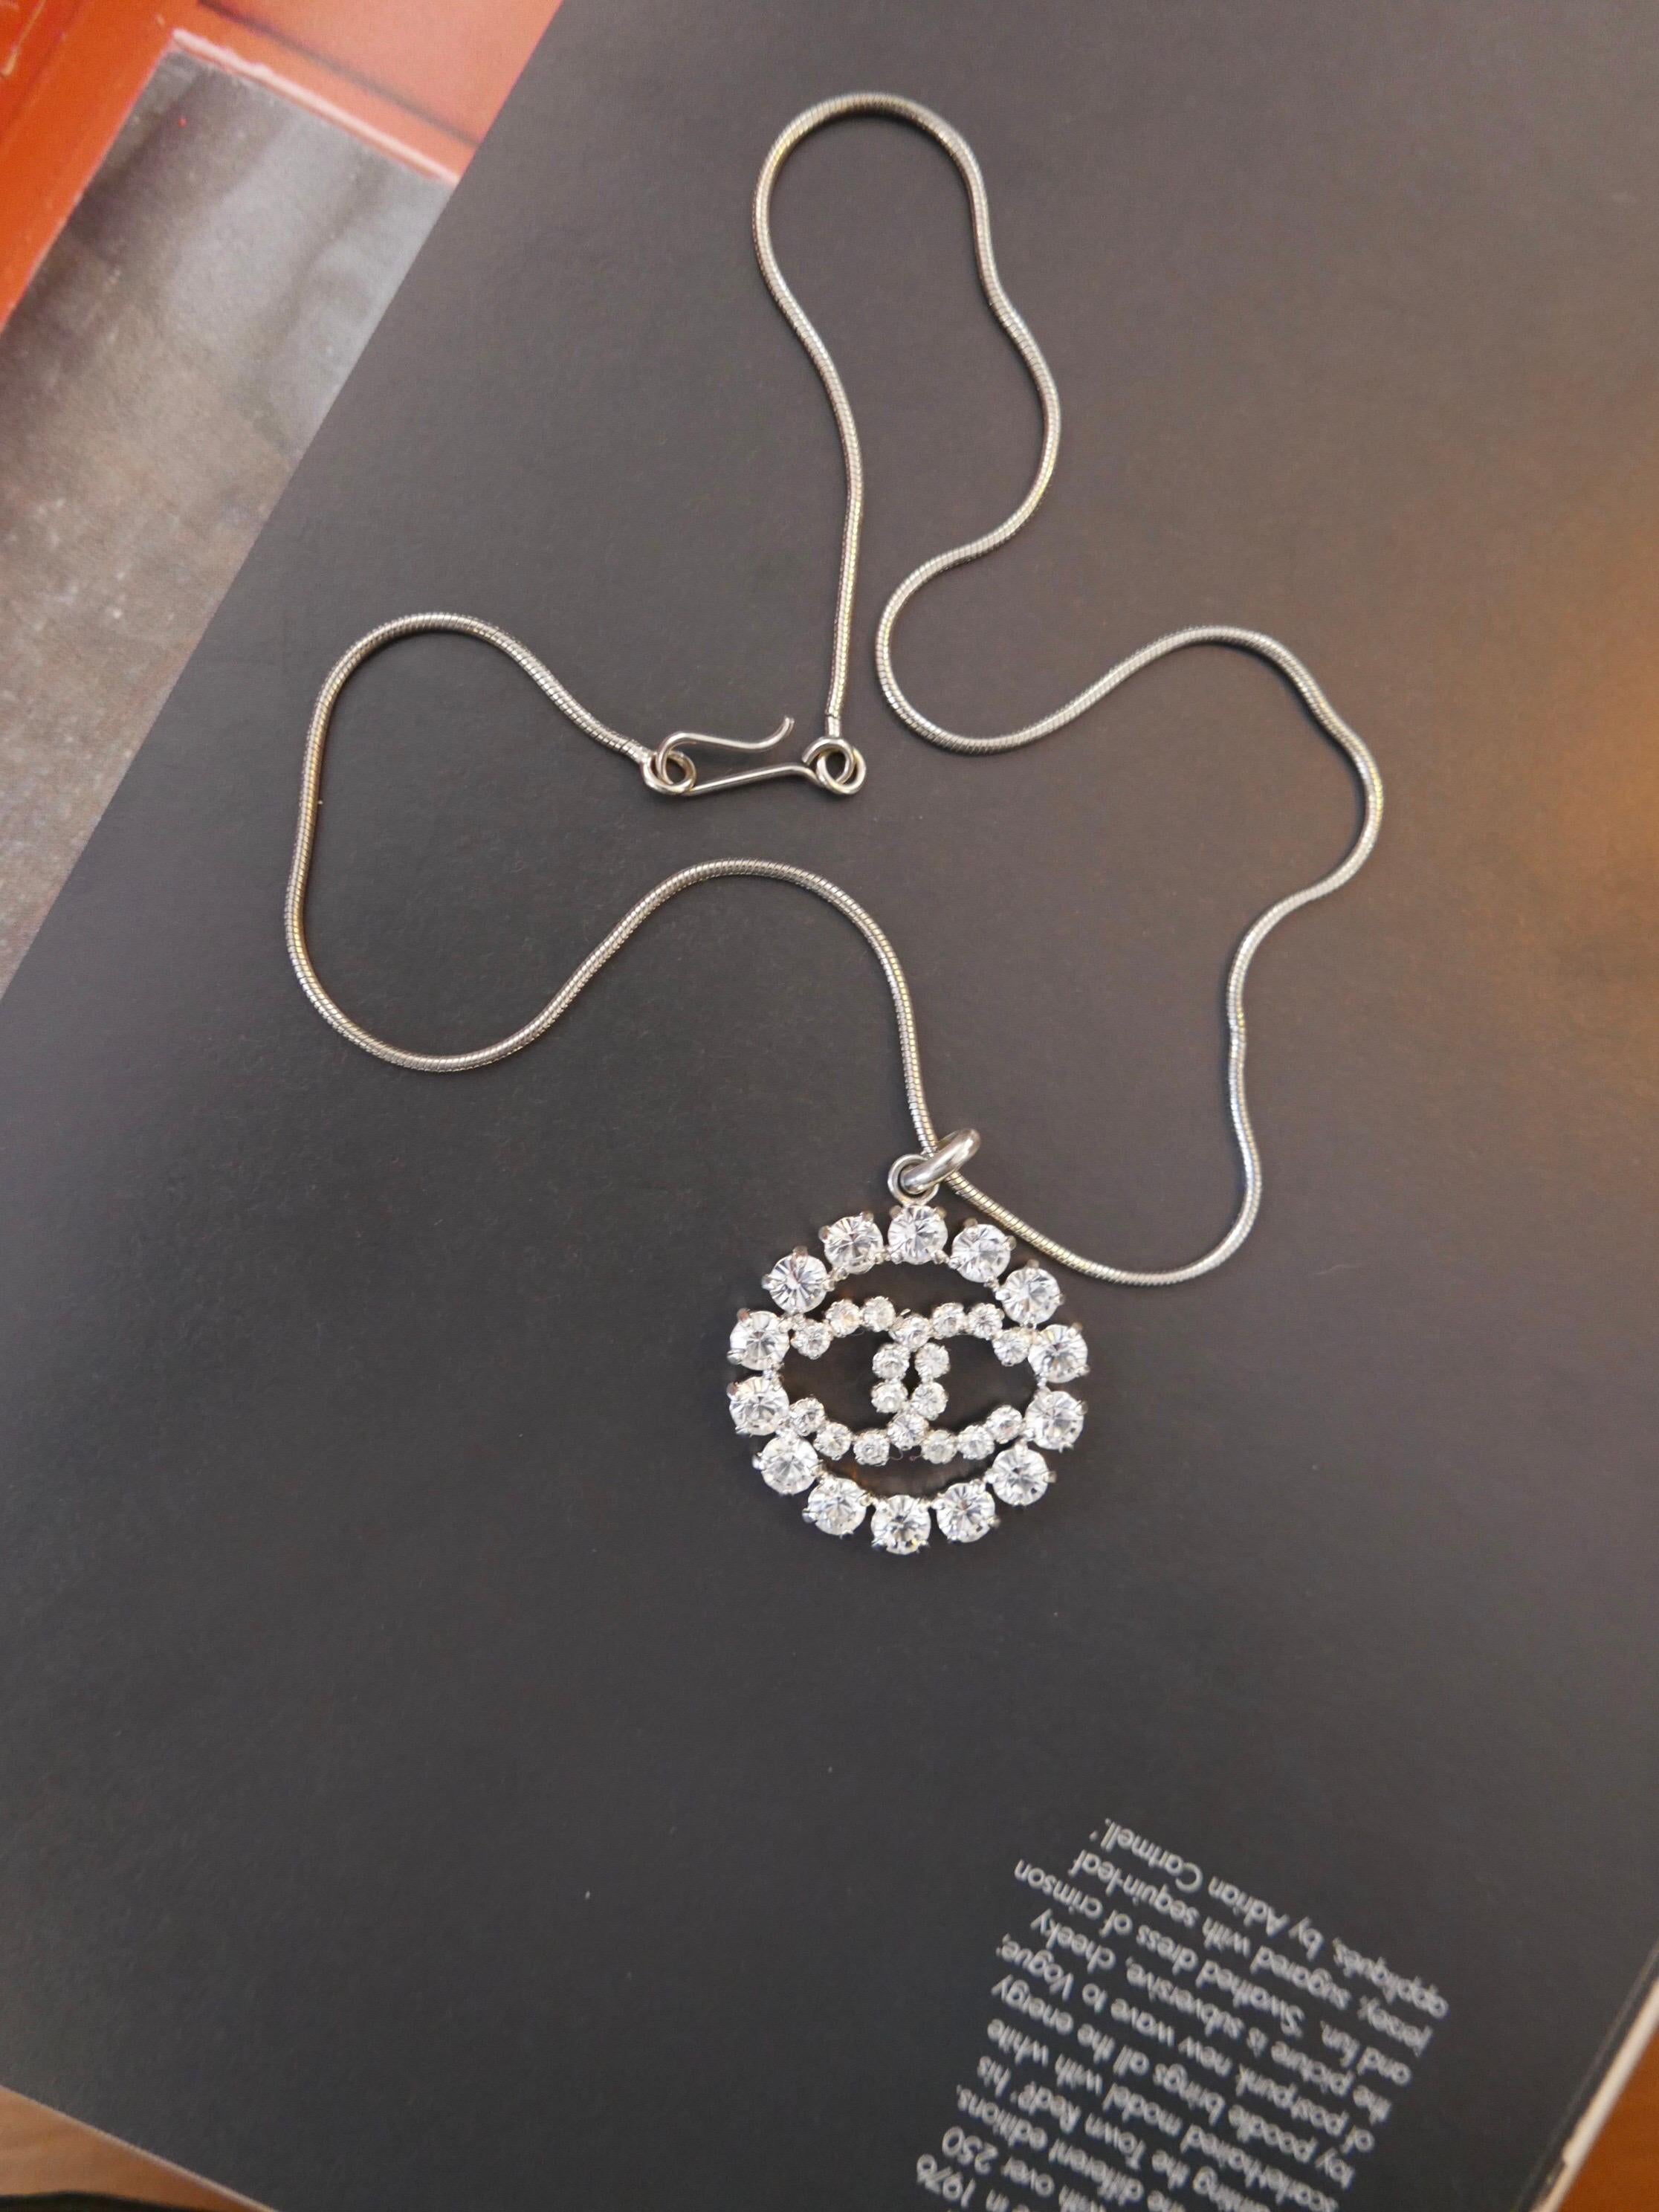 This year 2000 Chanel silver toned necklace features a rhinestone encrusted CC pendant. Measures 43cm Charm 3.2cm. Stamped 00A made in France. Comes with box.

Condition - Minor signs of wear. Generally in good condition.